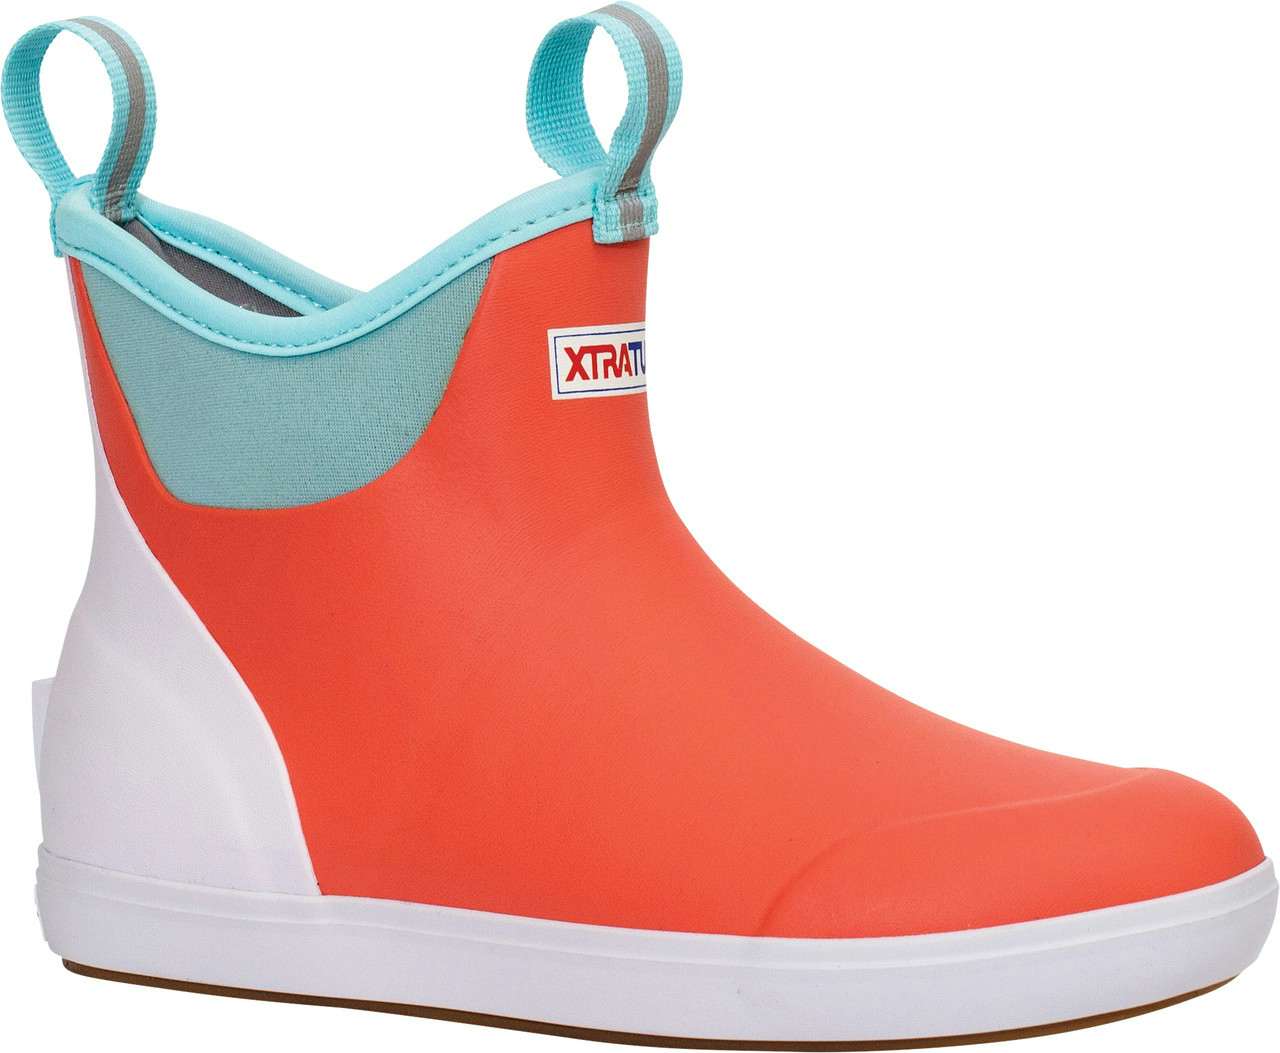 6" Ankle Rain Eco Boots Coral